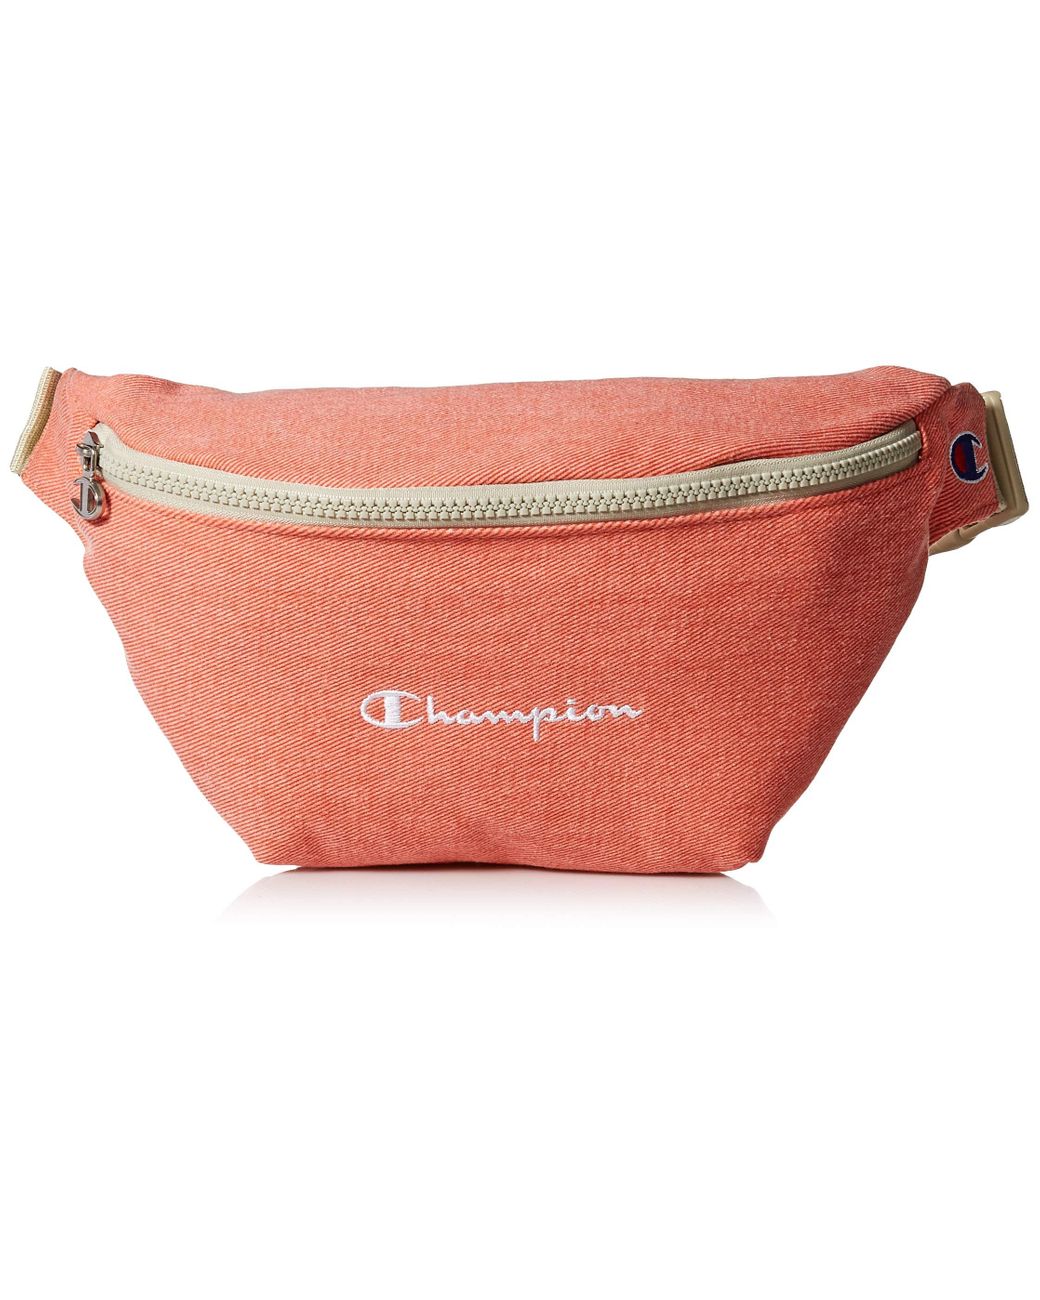 pink champion fanny pack